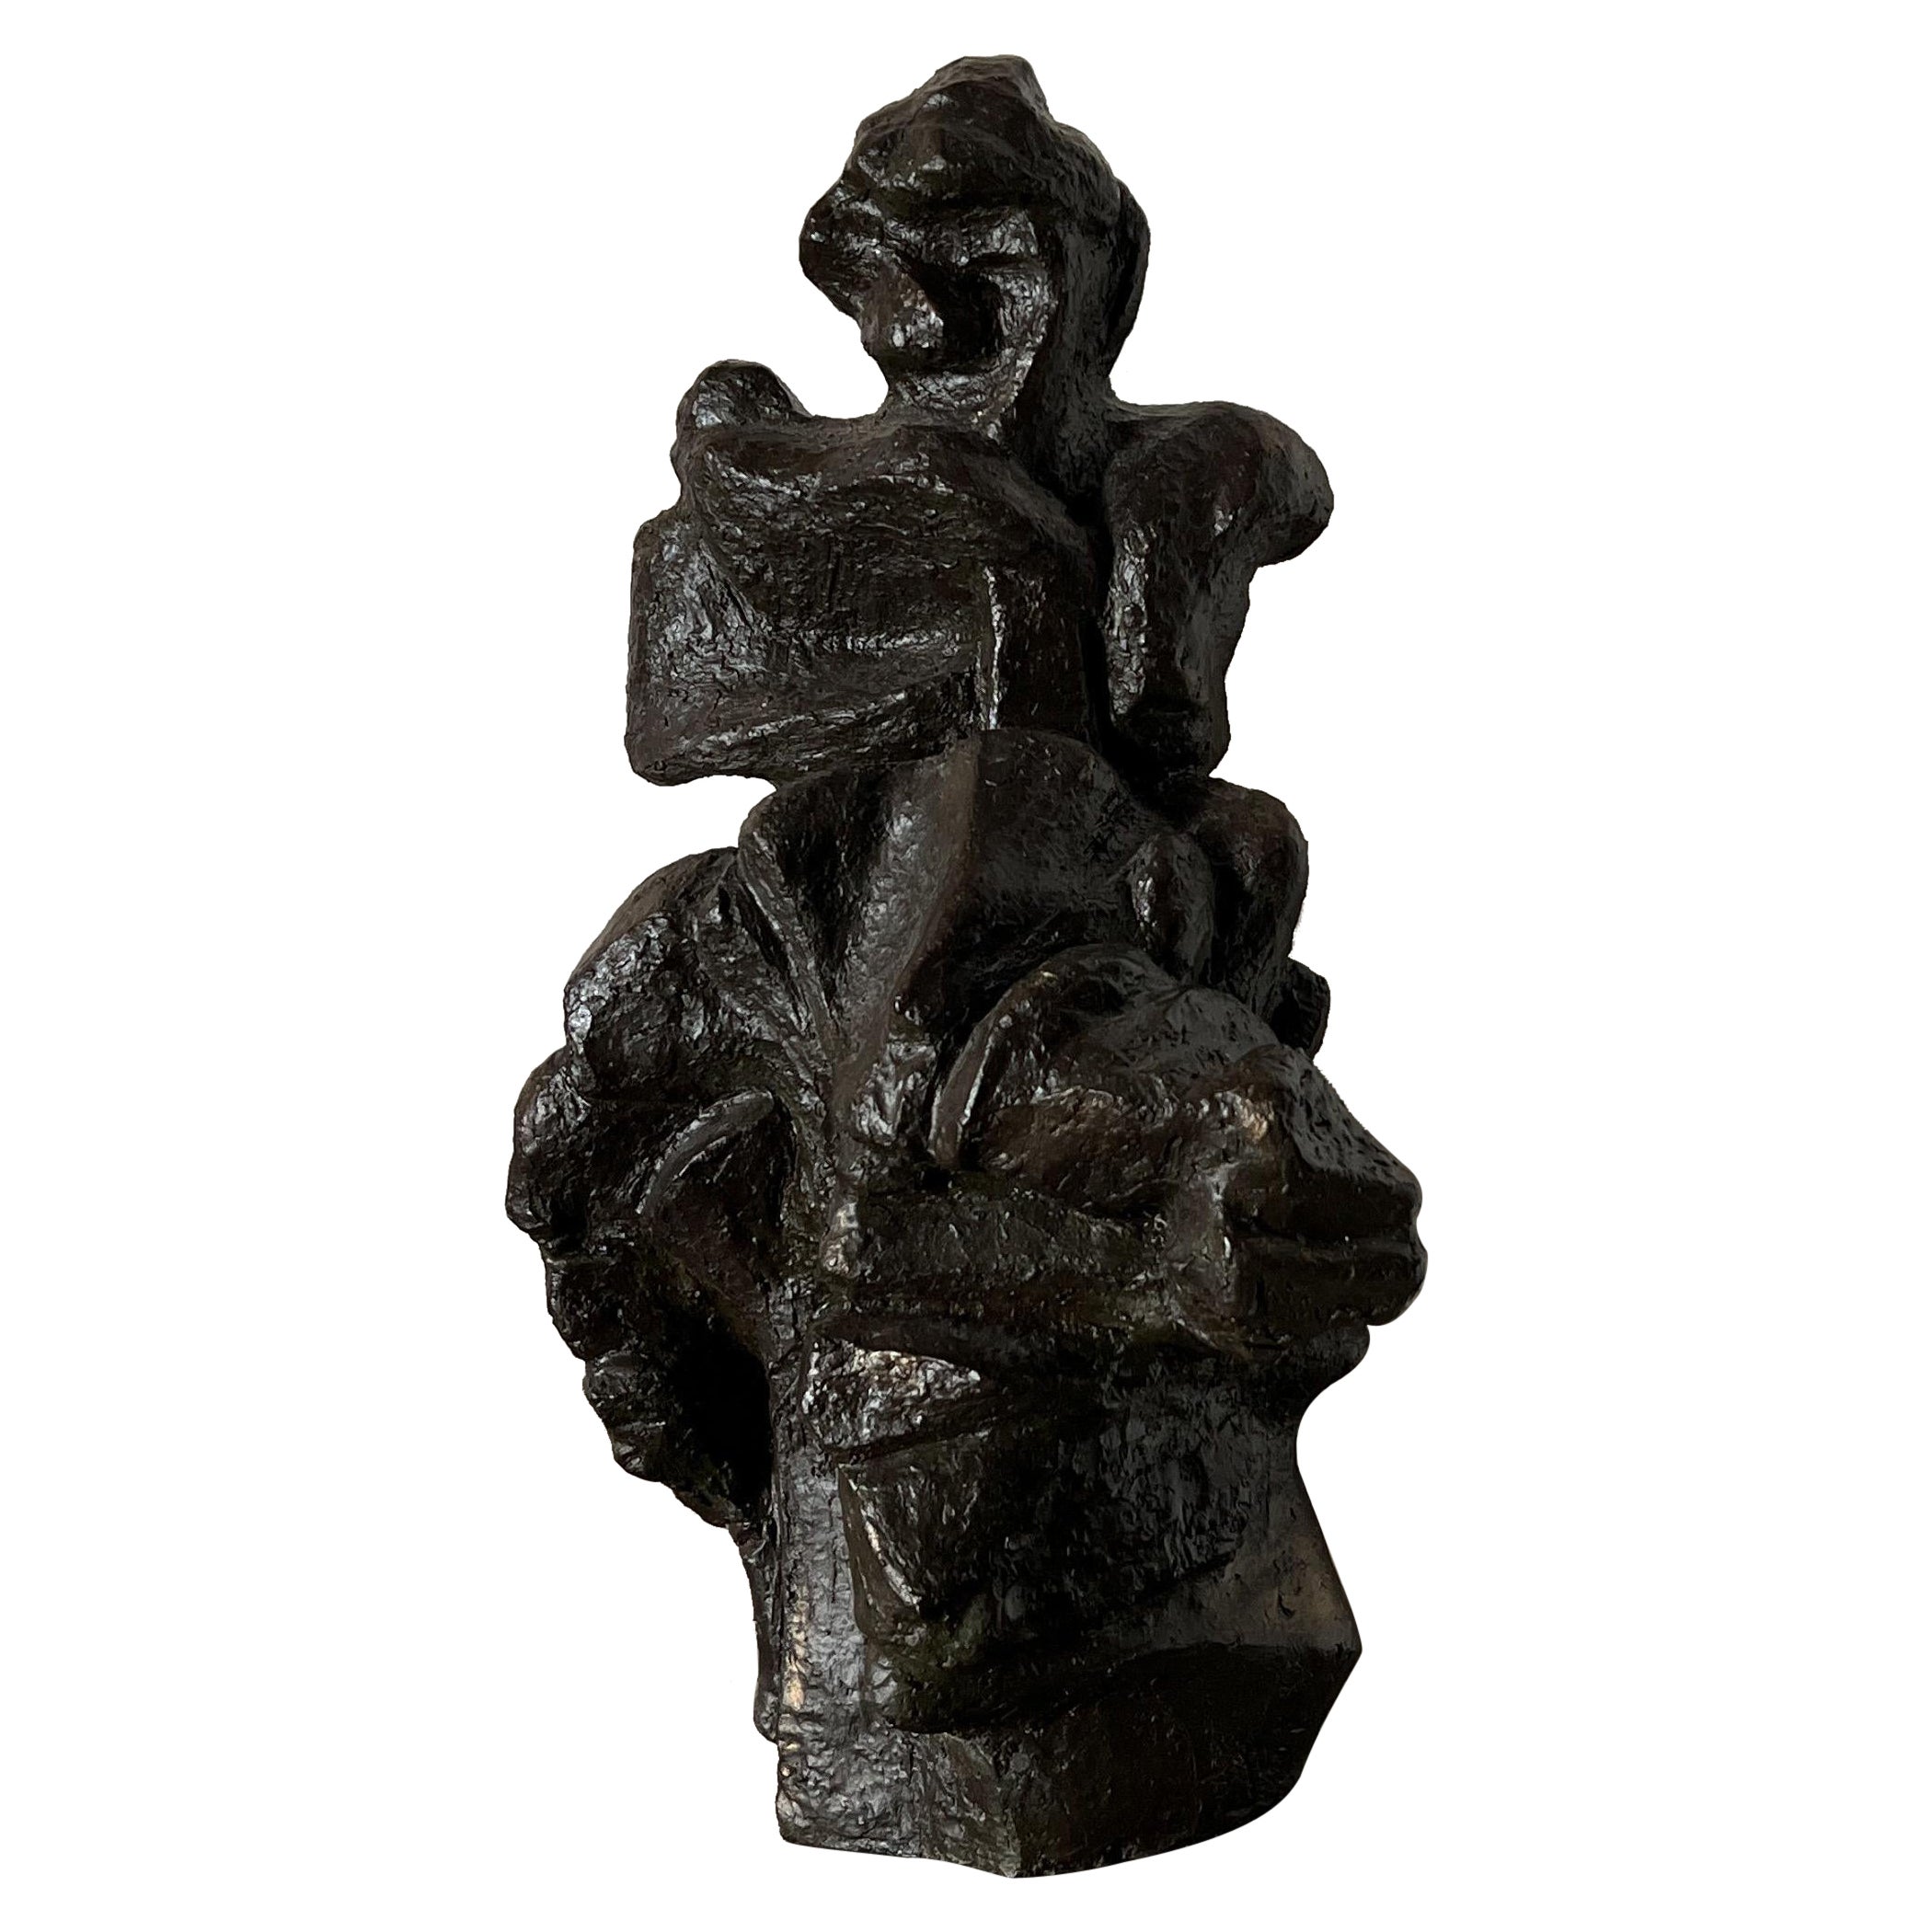 Brutalist abstract sculpture in black ceramic, Dutch, 1960s For Sale